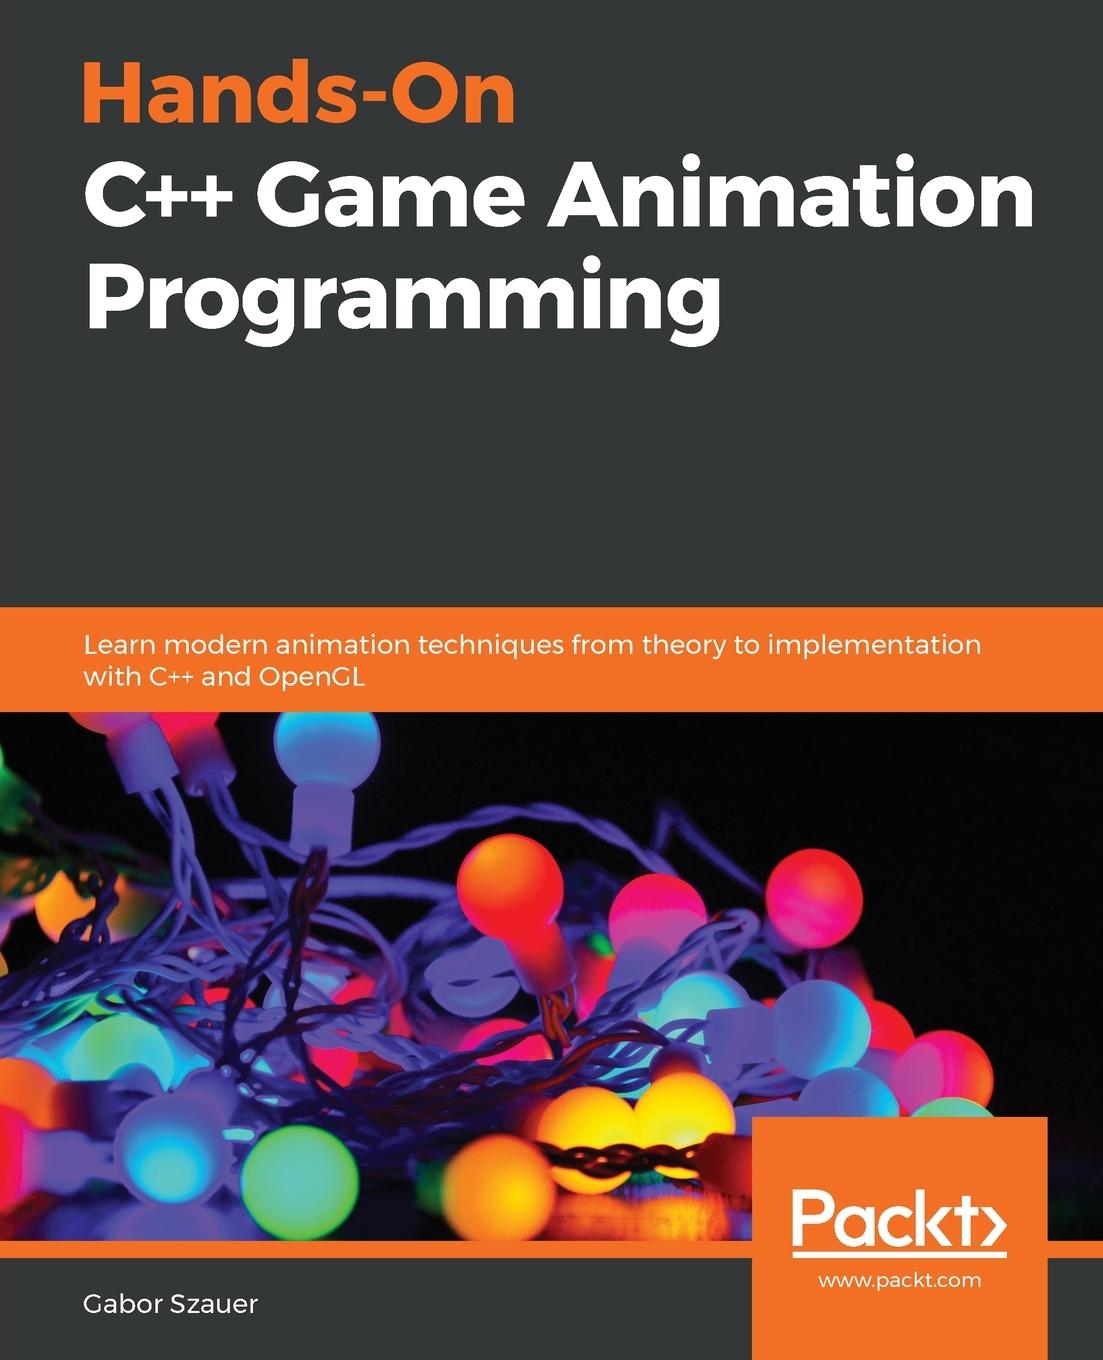 Book Hands-On C++ Game Animation Programming 